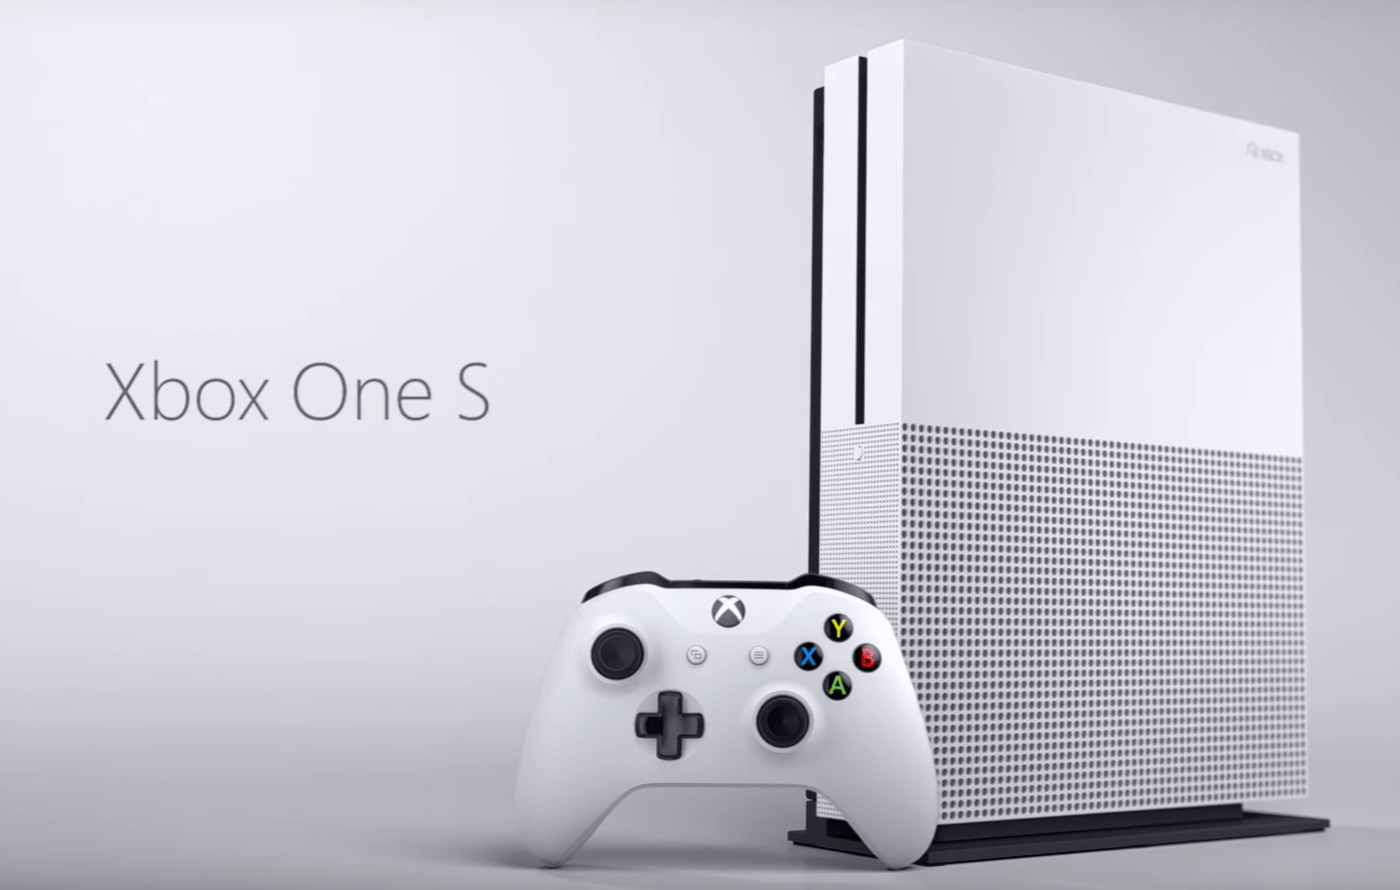 Xbox One S is launched